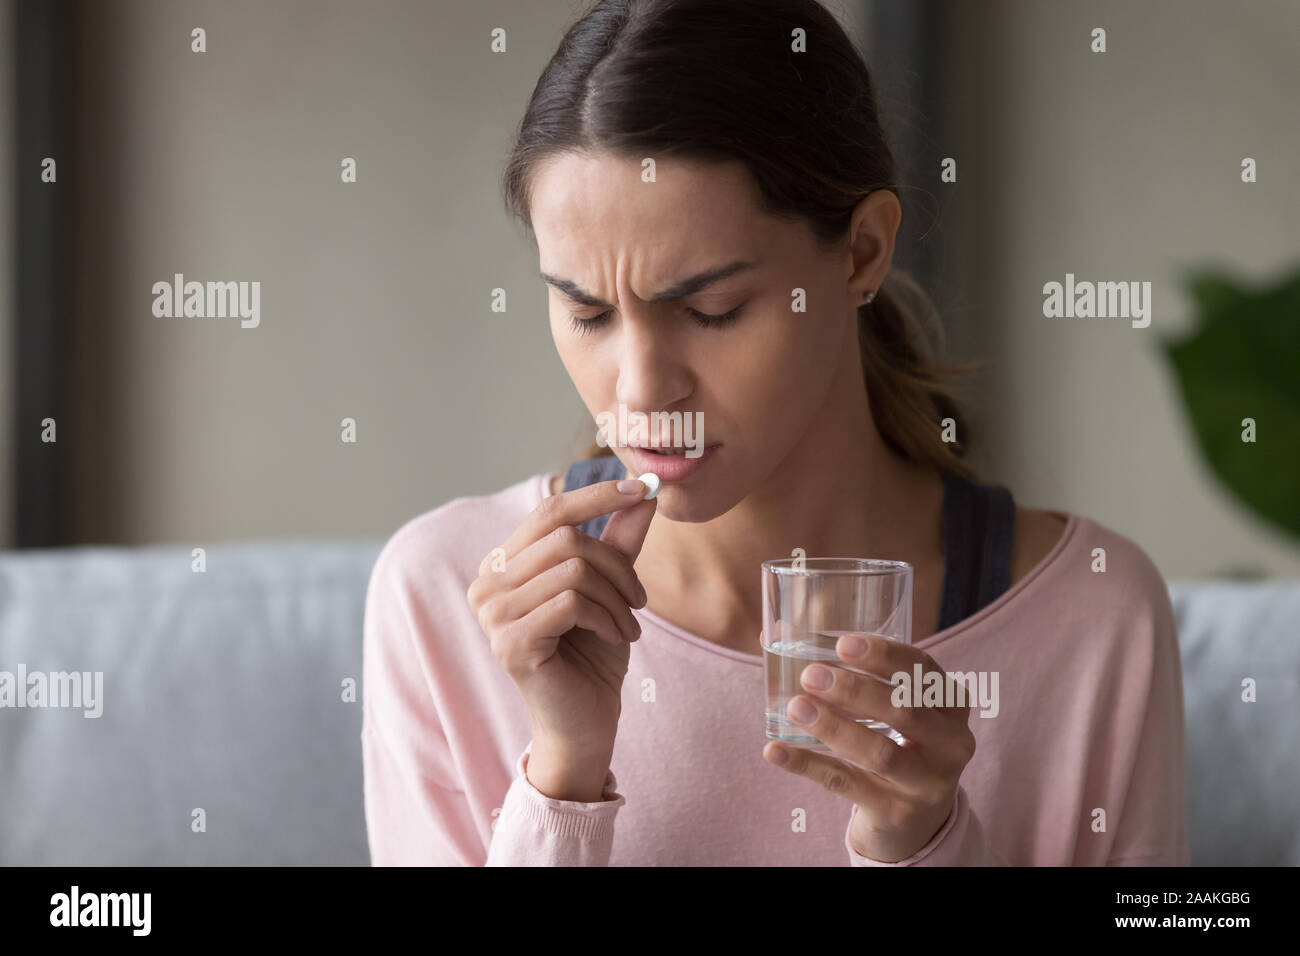 Unwell young woman consider having prescribed medication Stock Photo